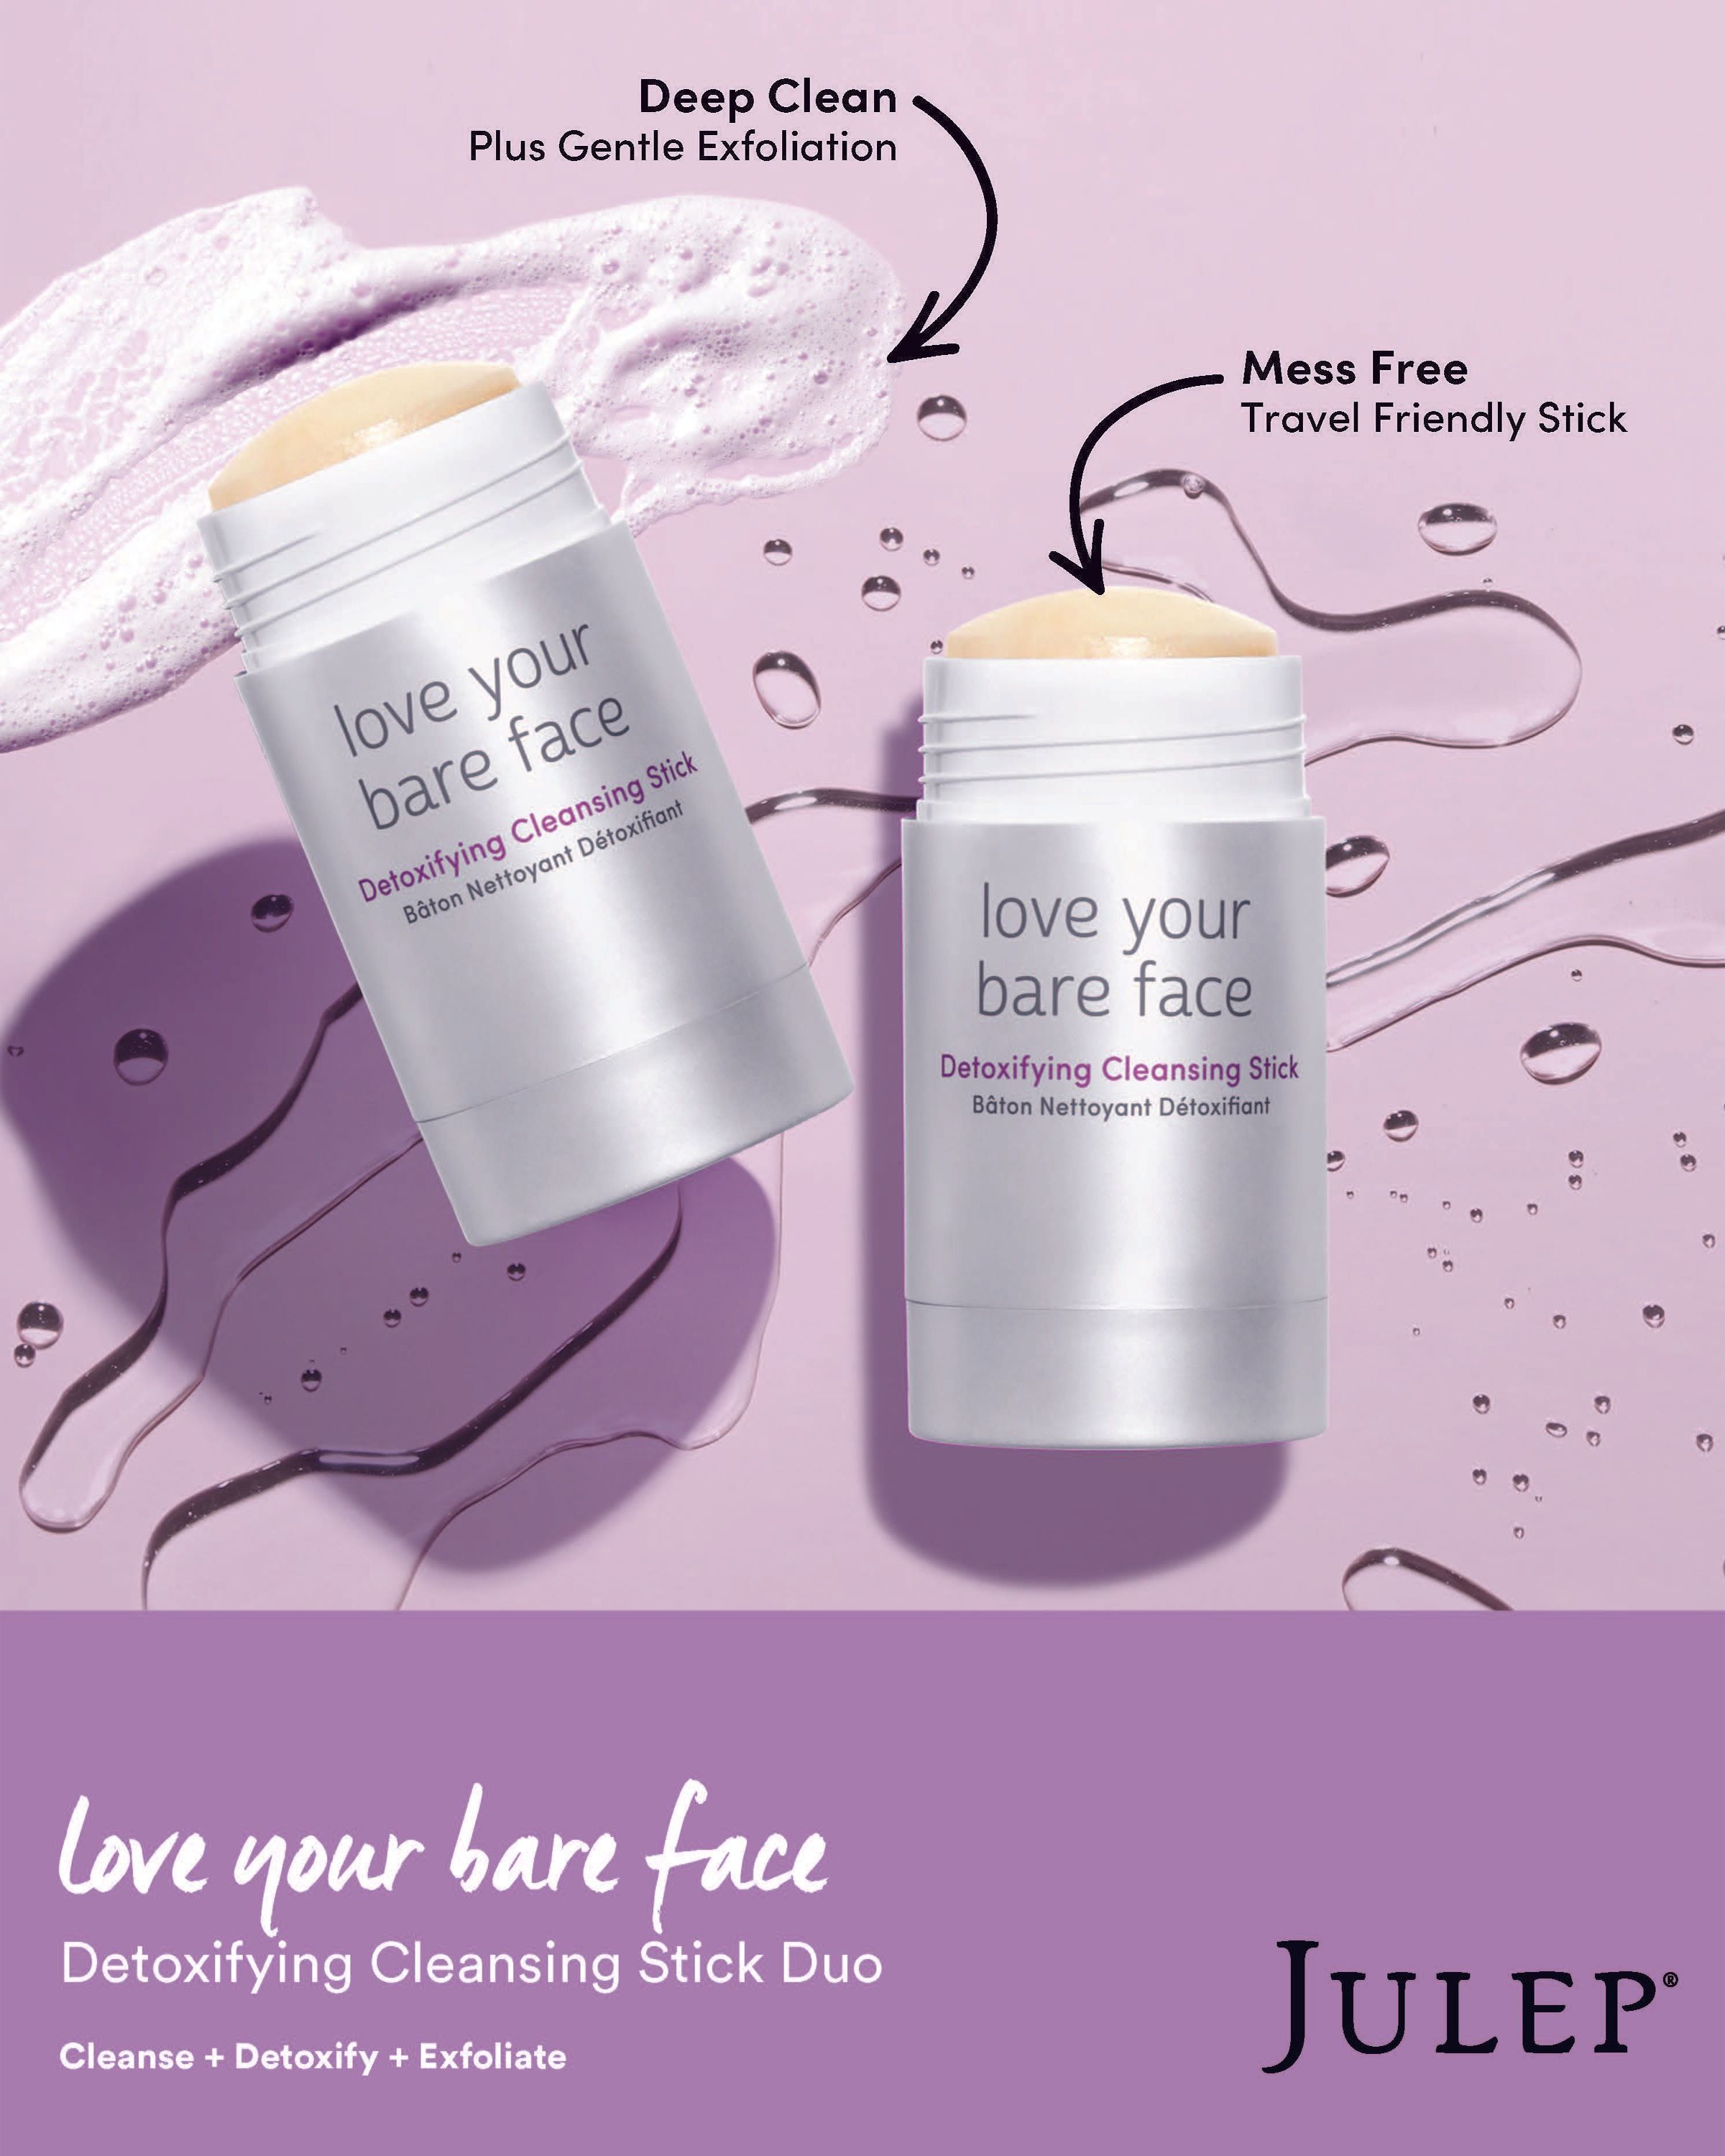 Deep clean plus gentle exfoliation. Mess free travel friendly stick. Love your bare face. Detoxifying Cleansing Stick Duo. Cleanse + Detoxify + Exfoliate